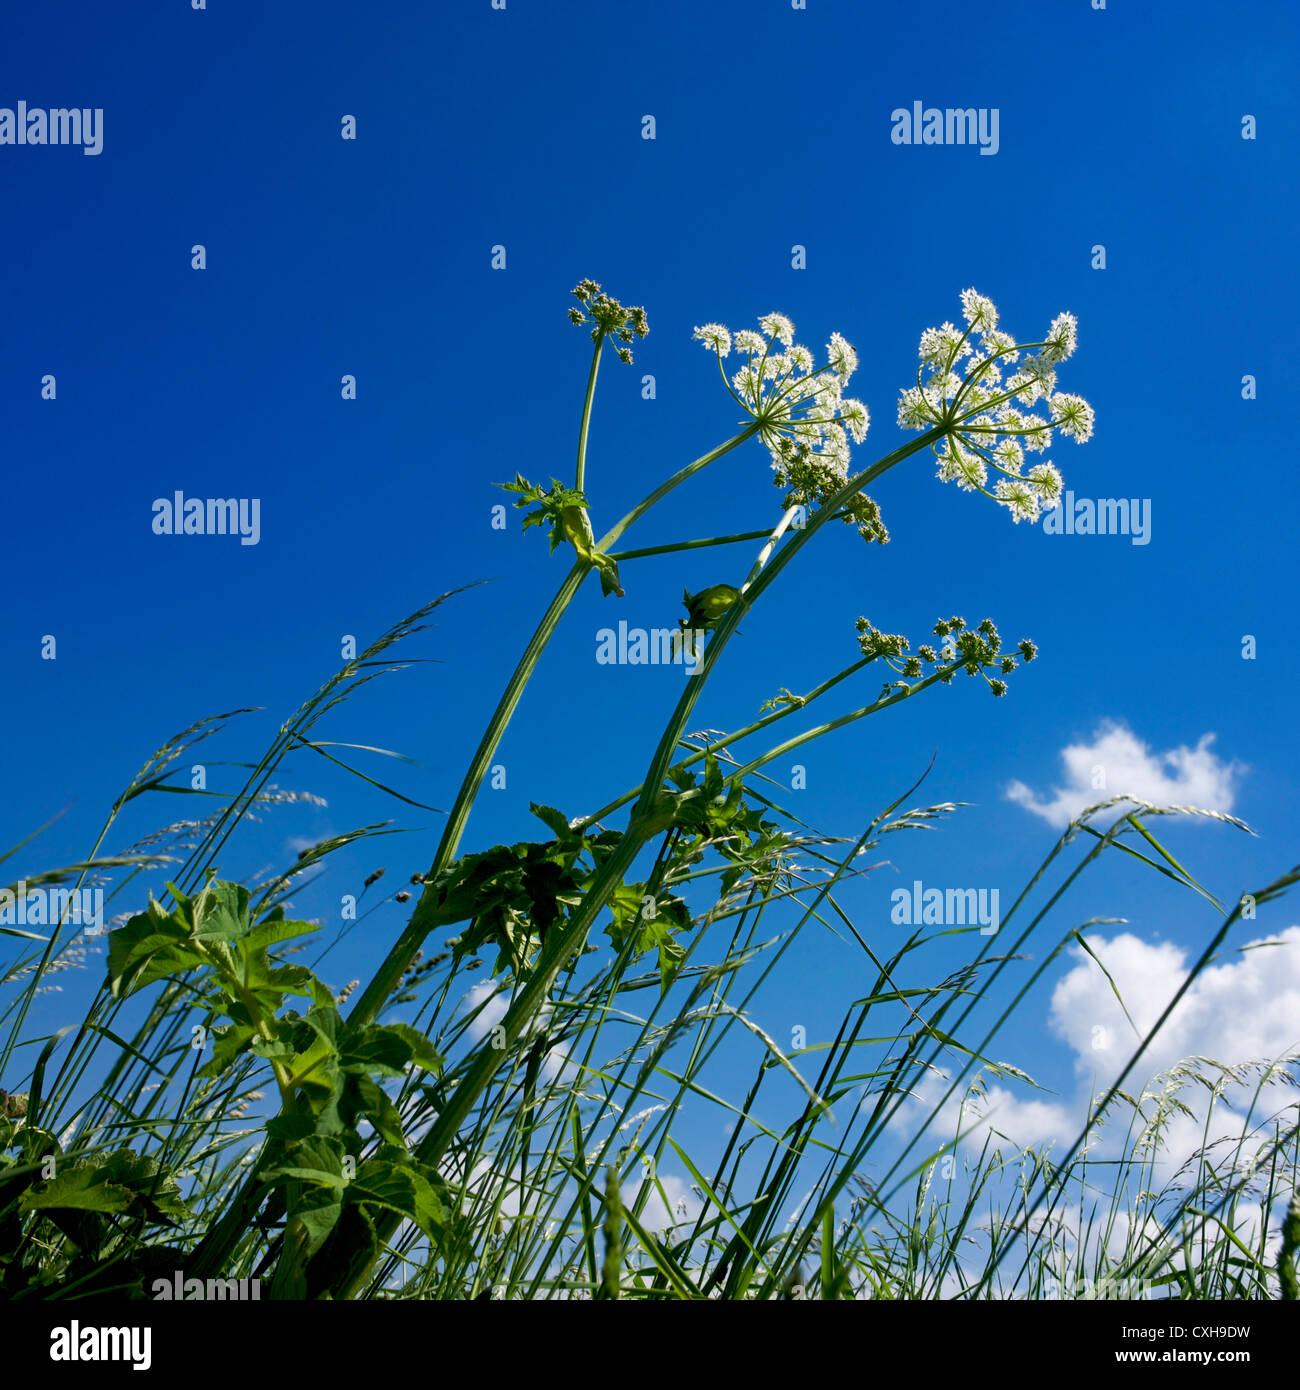 Umbels, abstract silhouettes. Angelica umbel (Angelica archangelica). France. Stock Photo